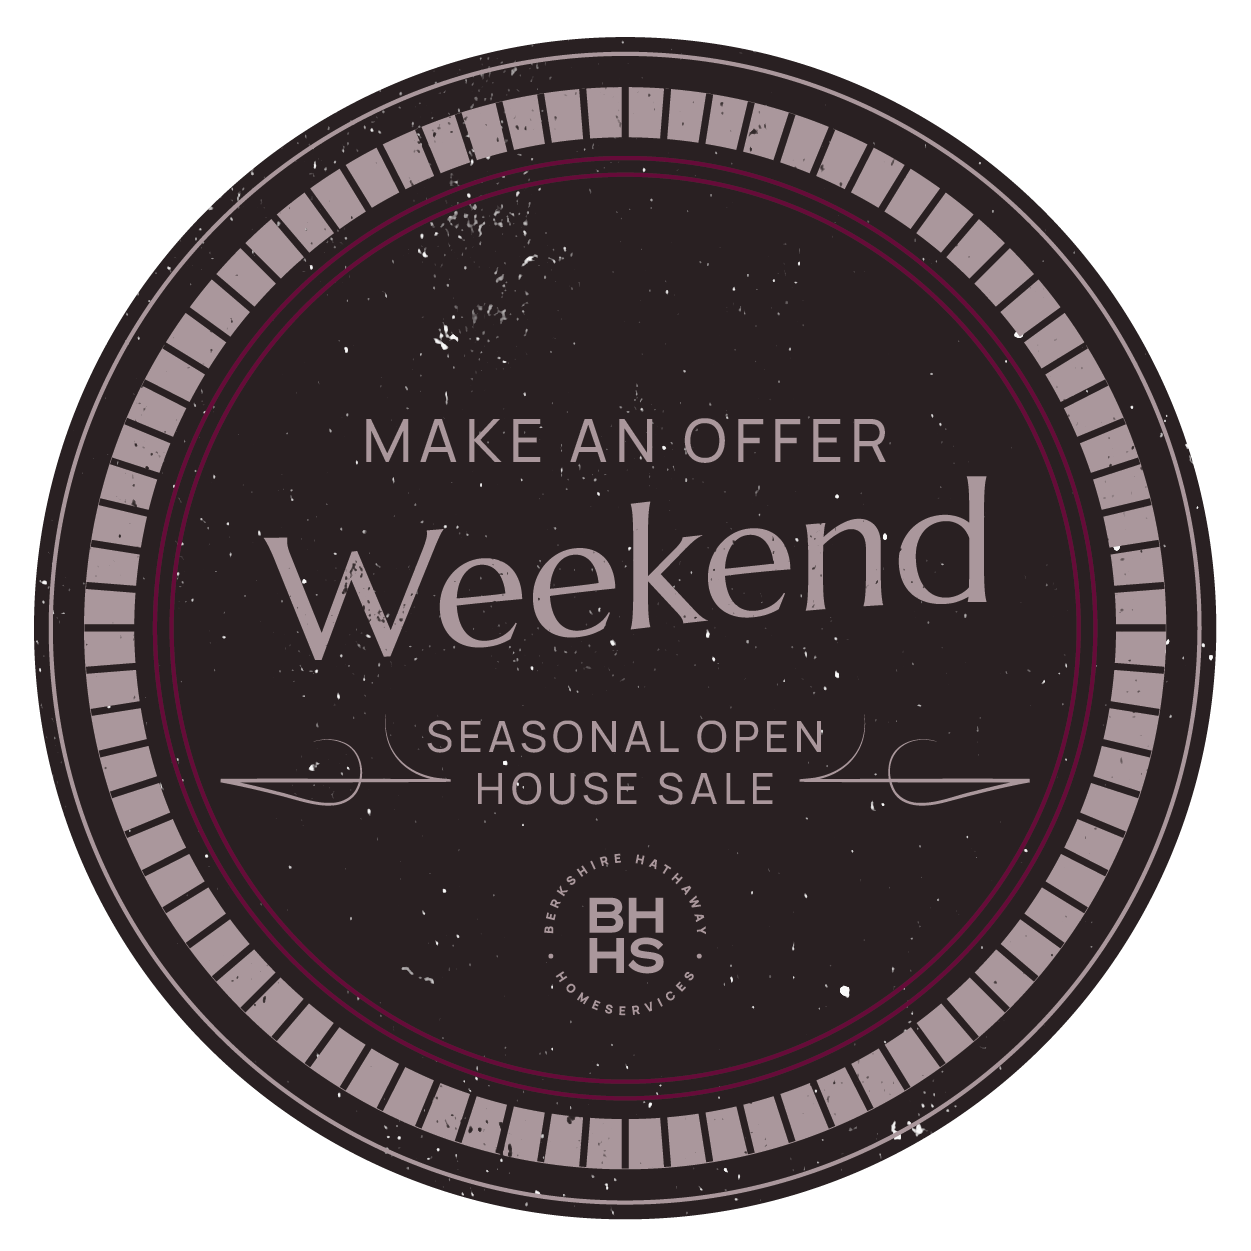 Make an Offer Weekend - Circle Tag